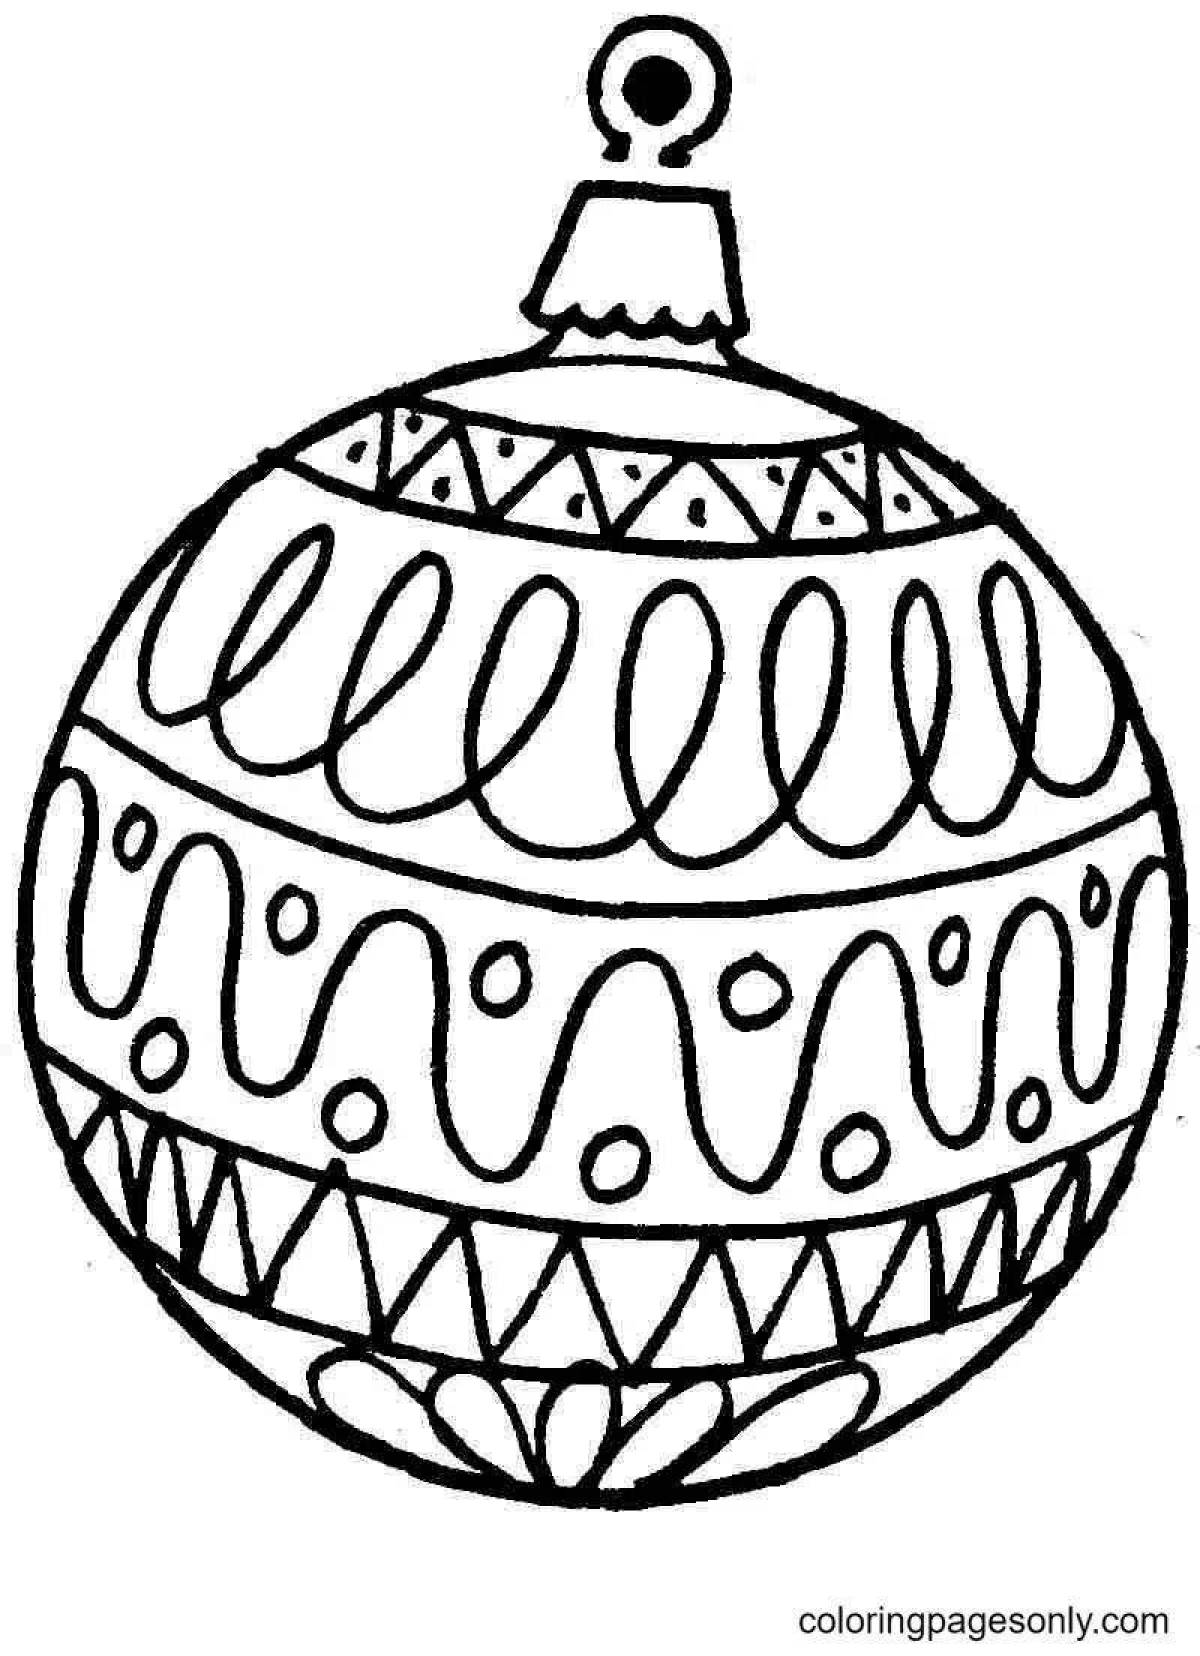 Glowing Christmas ball coloring book